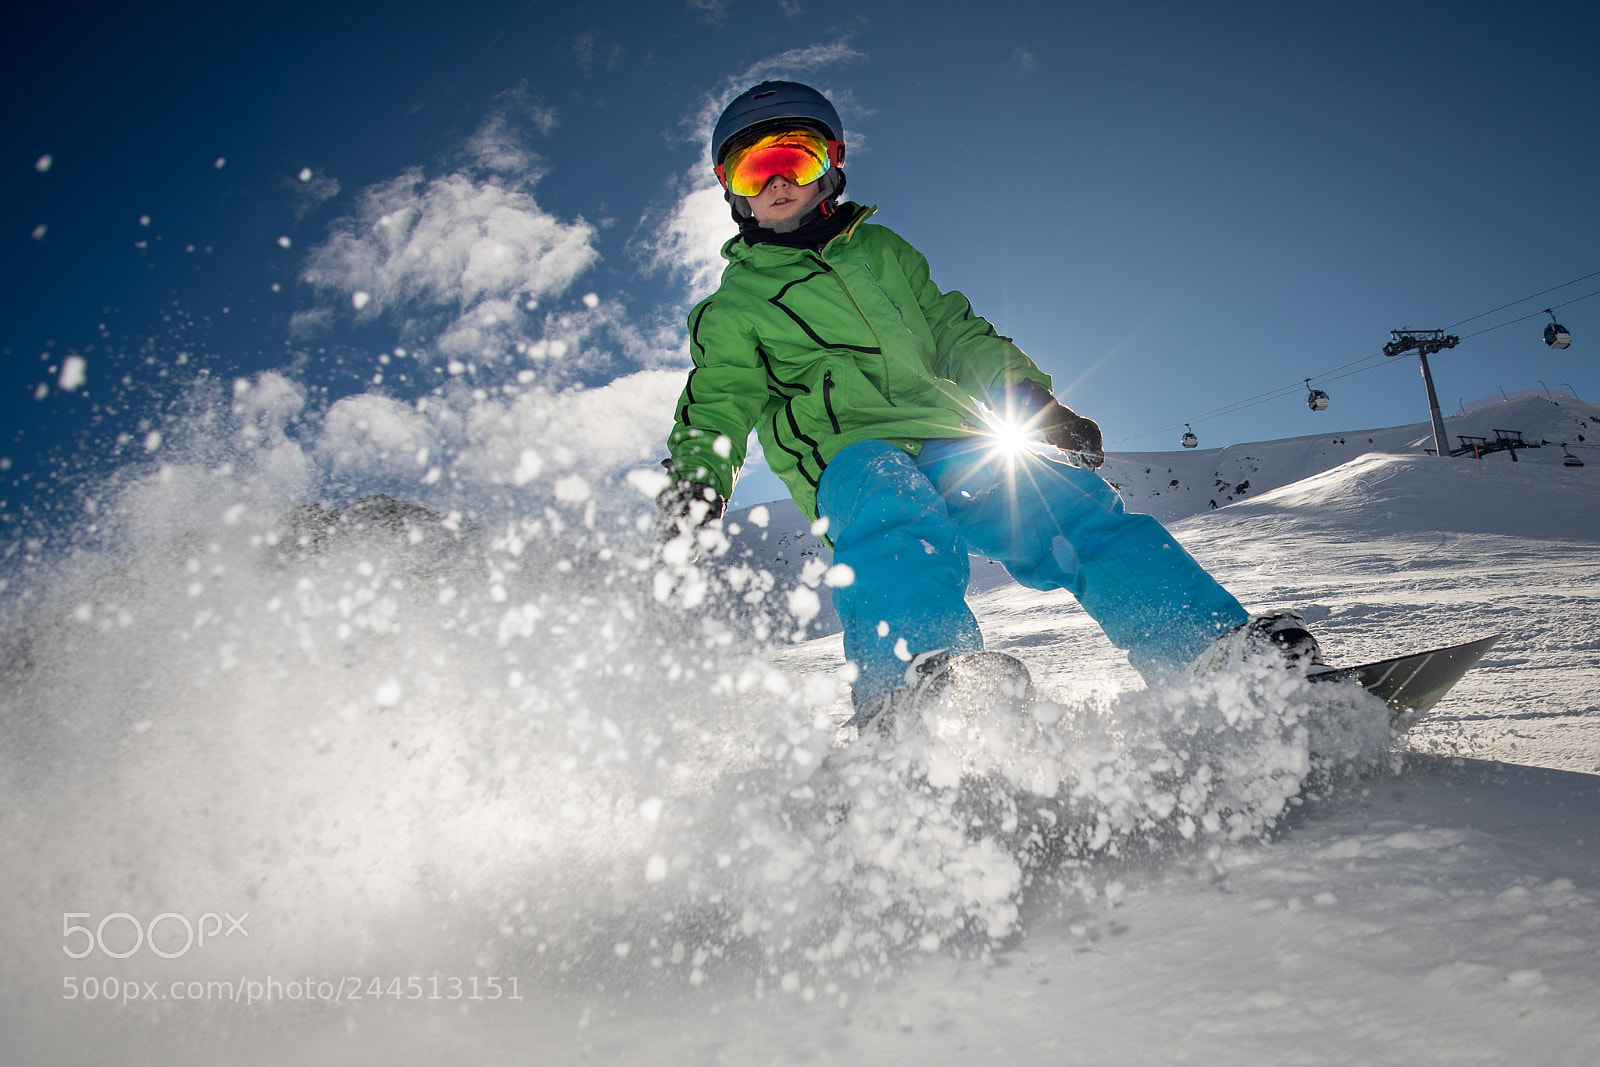 Sony a99 II sample photo. Perfect day for snowboarding photography